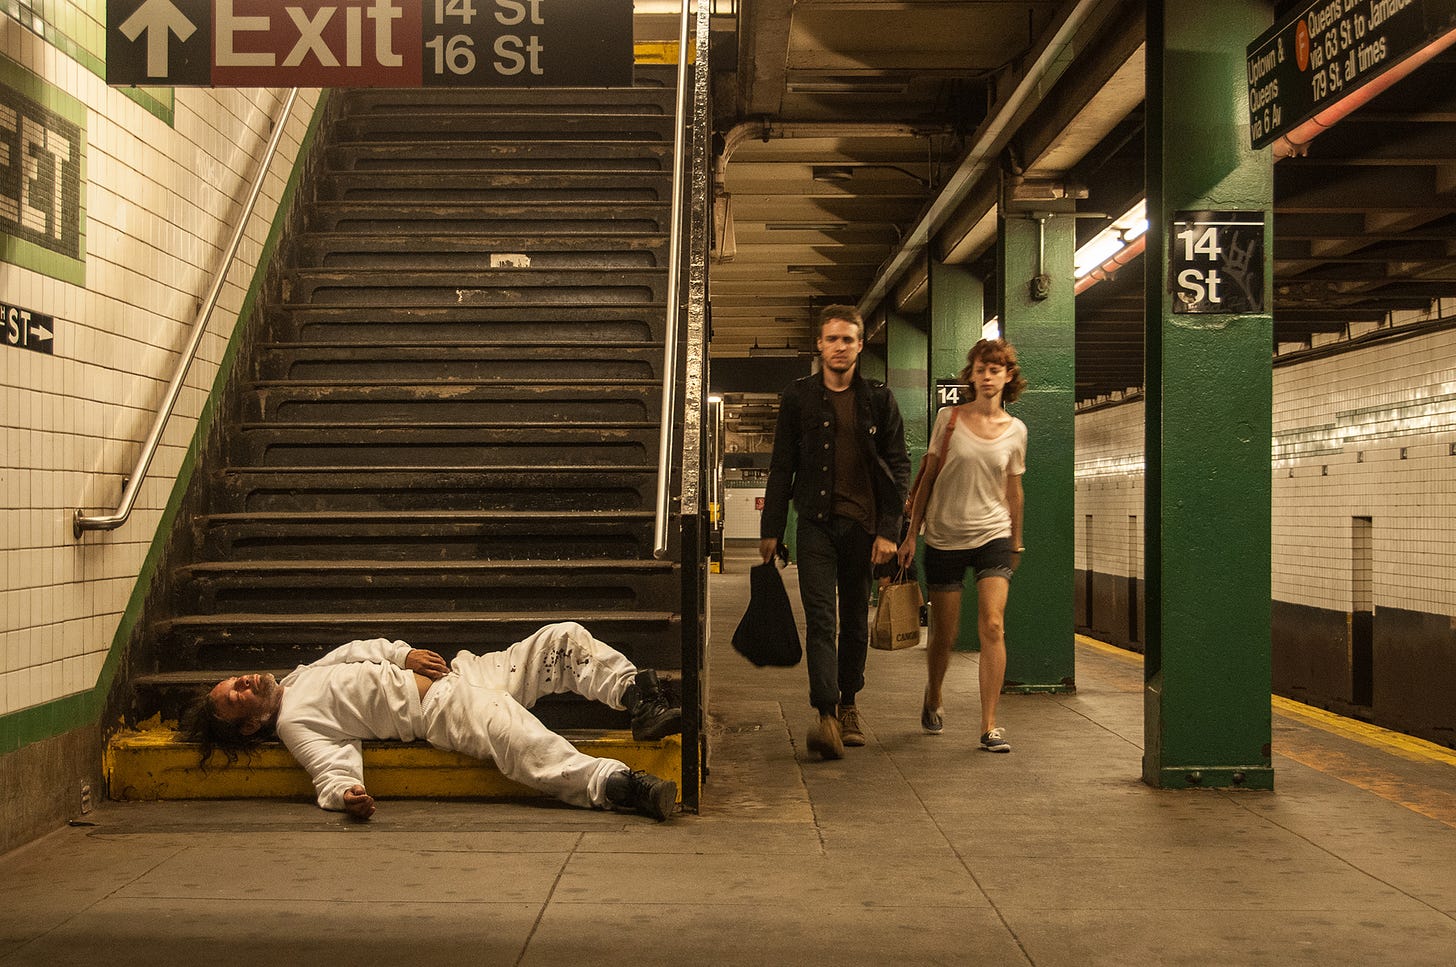 Image result from https://nypost.com/2018/10/22/mta-will-crack-down-on-homeless-people-in-subways/